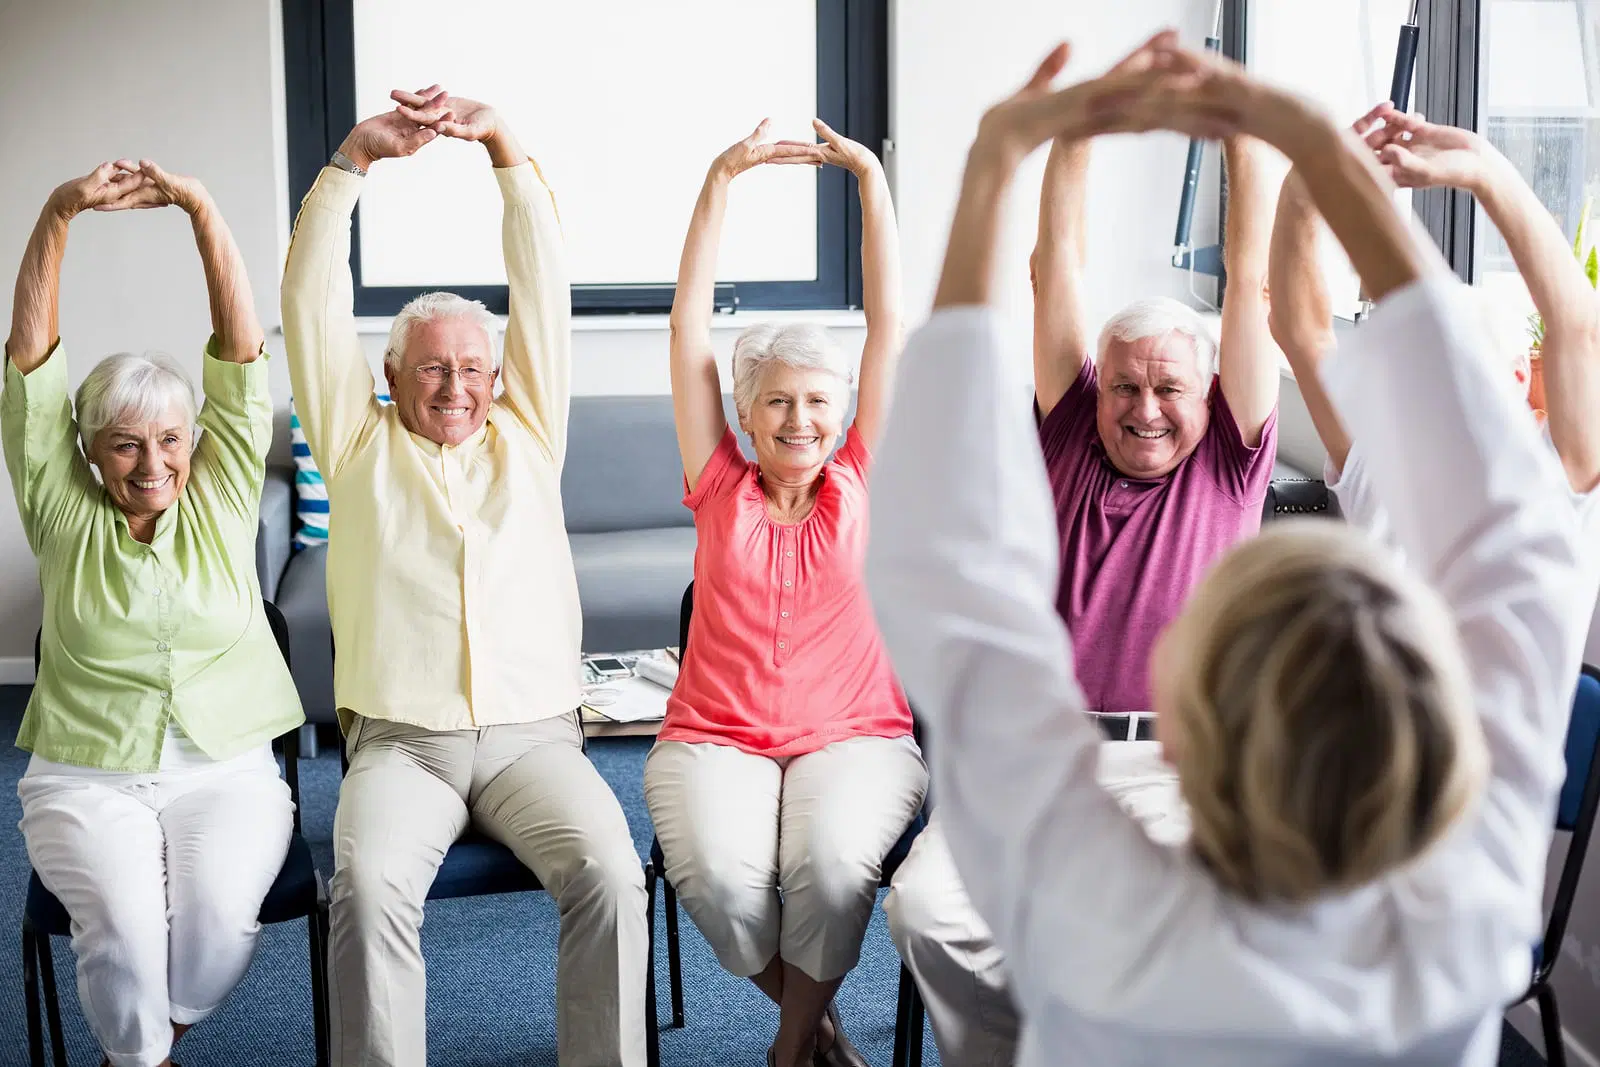 A group of elderly people seated in chairs, led by an instructor, perform synchronized arm stretches in a well-lit room with large windows.